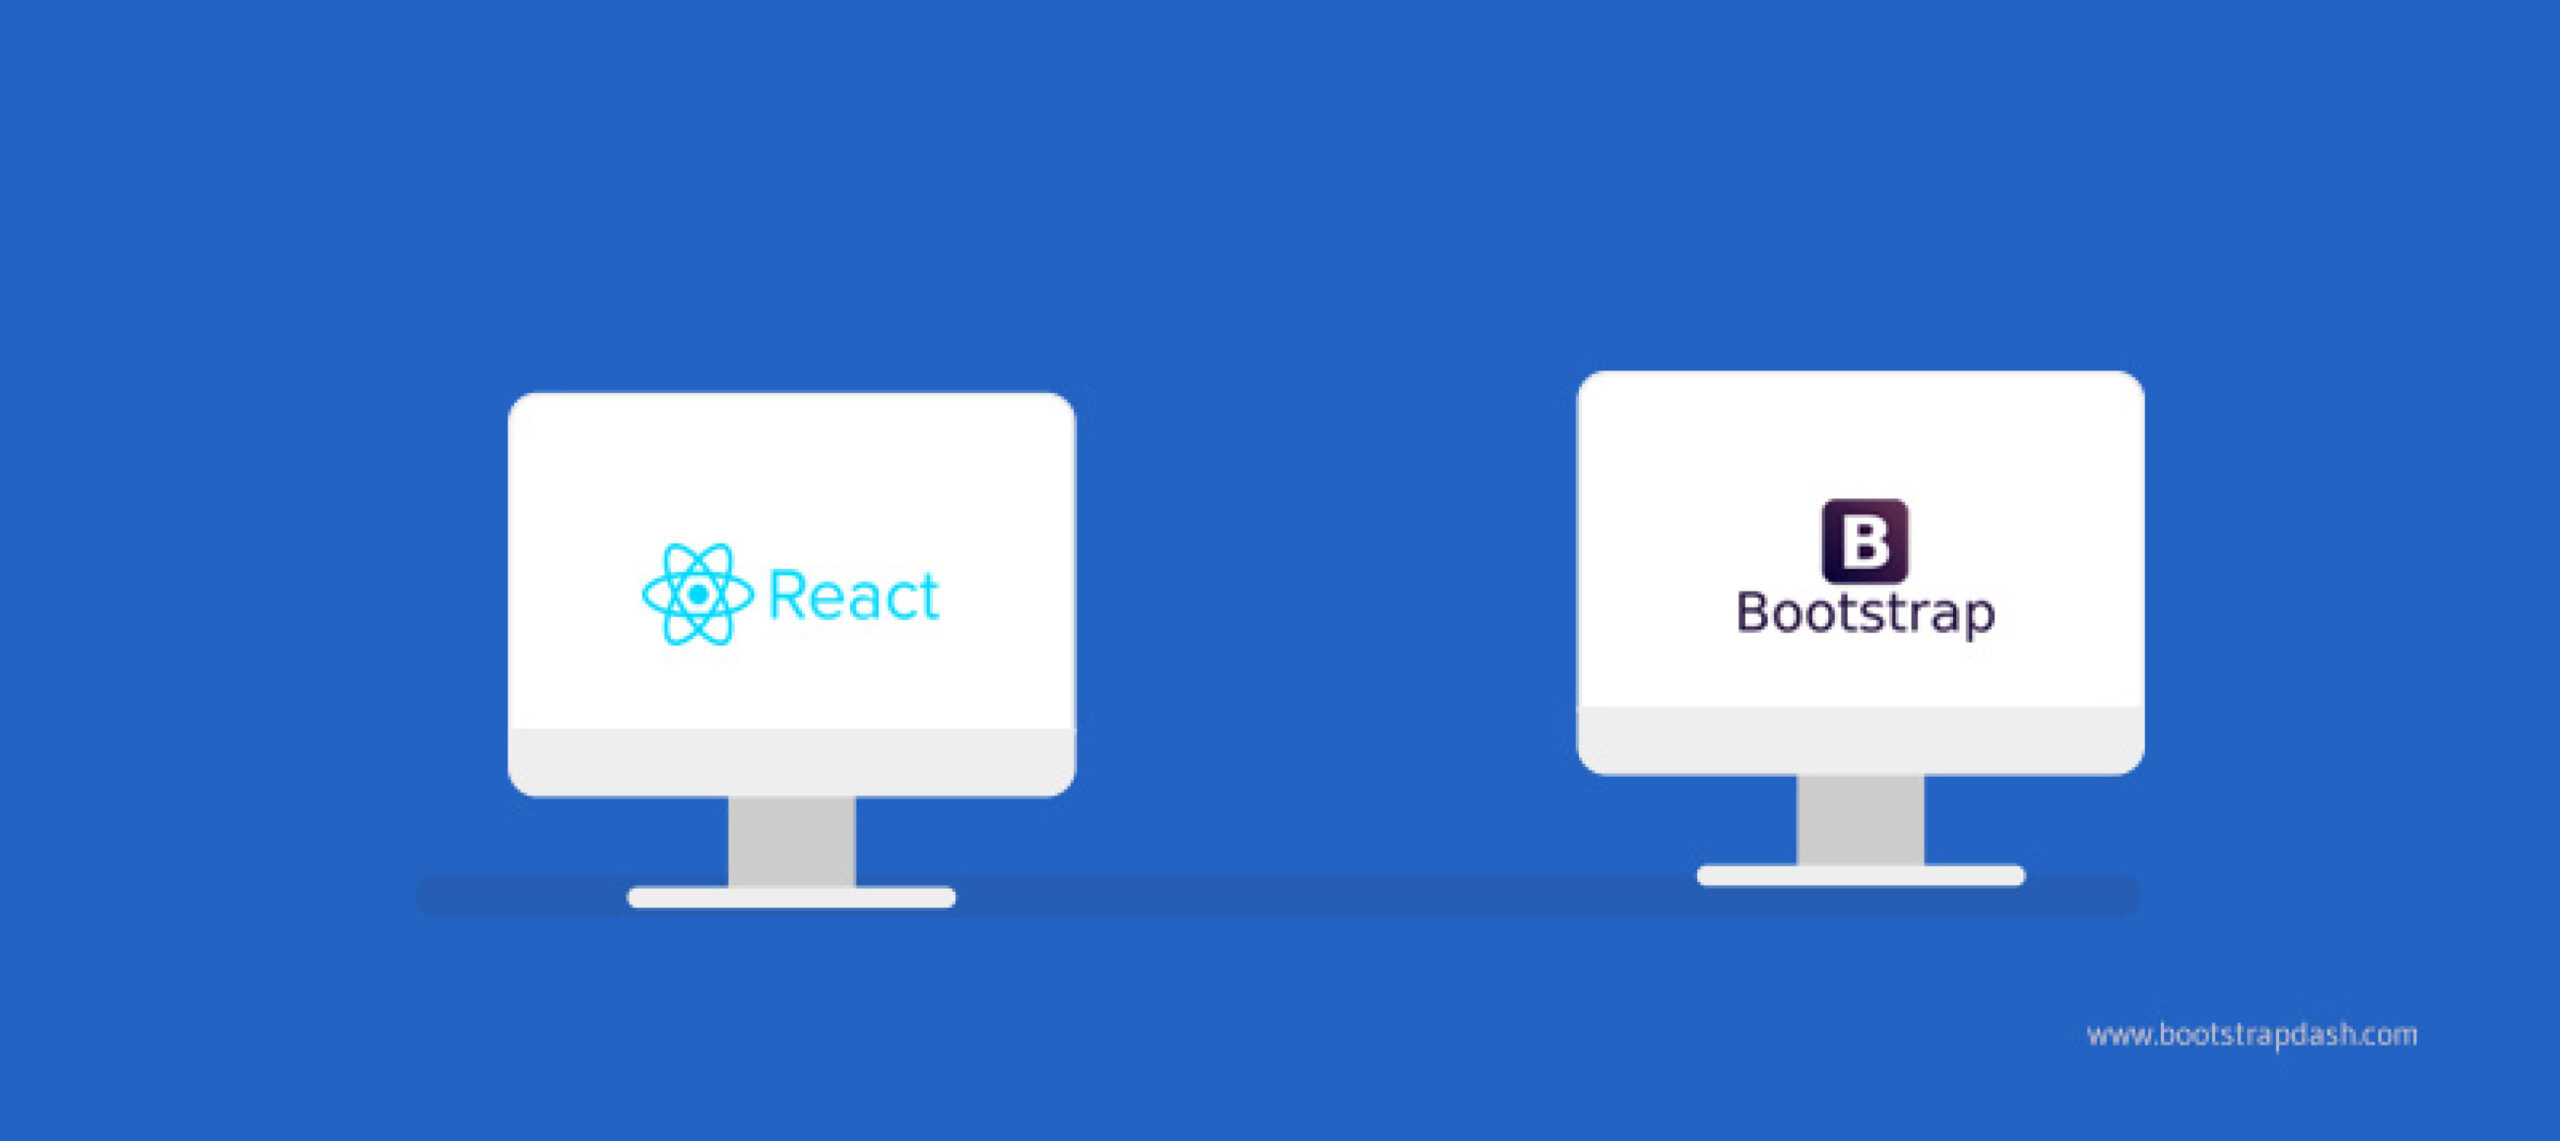 Easy Guide to use Bootstrap With React | BootstrapDash